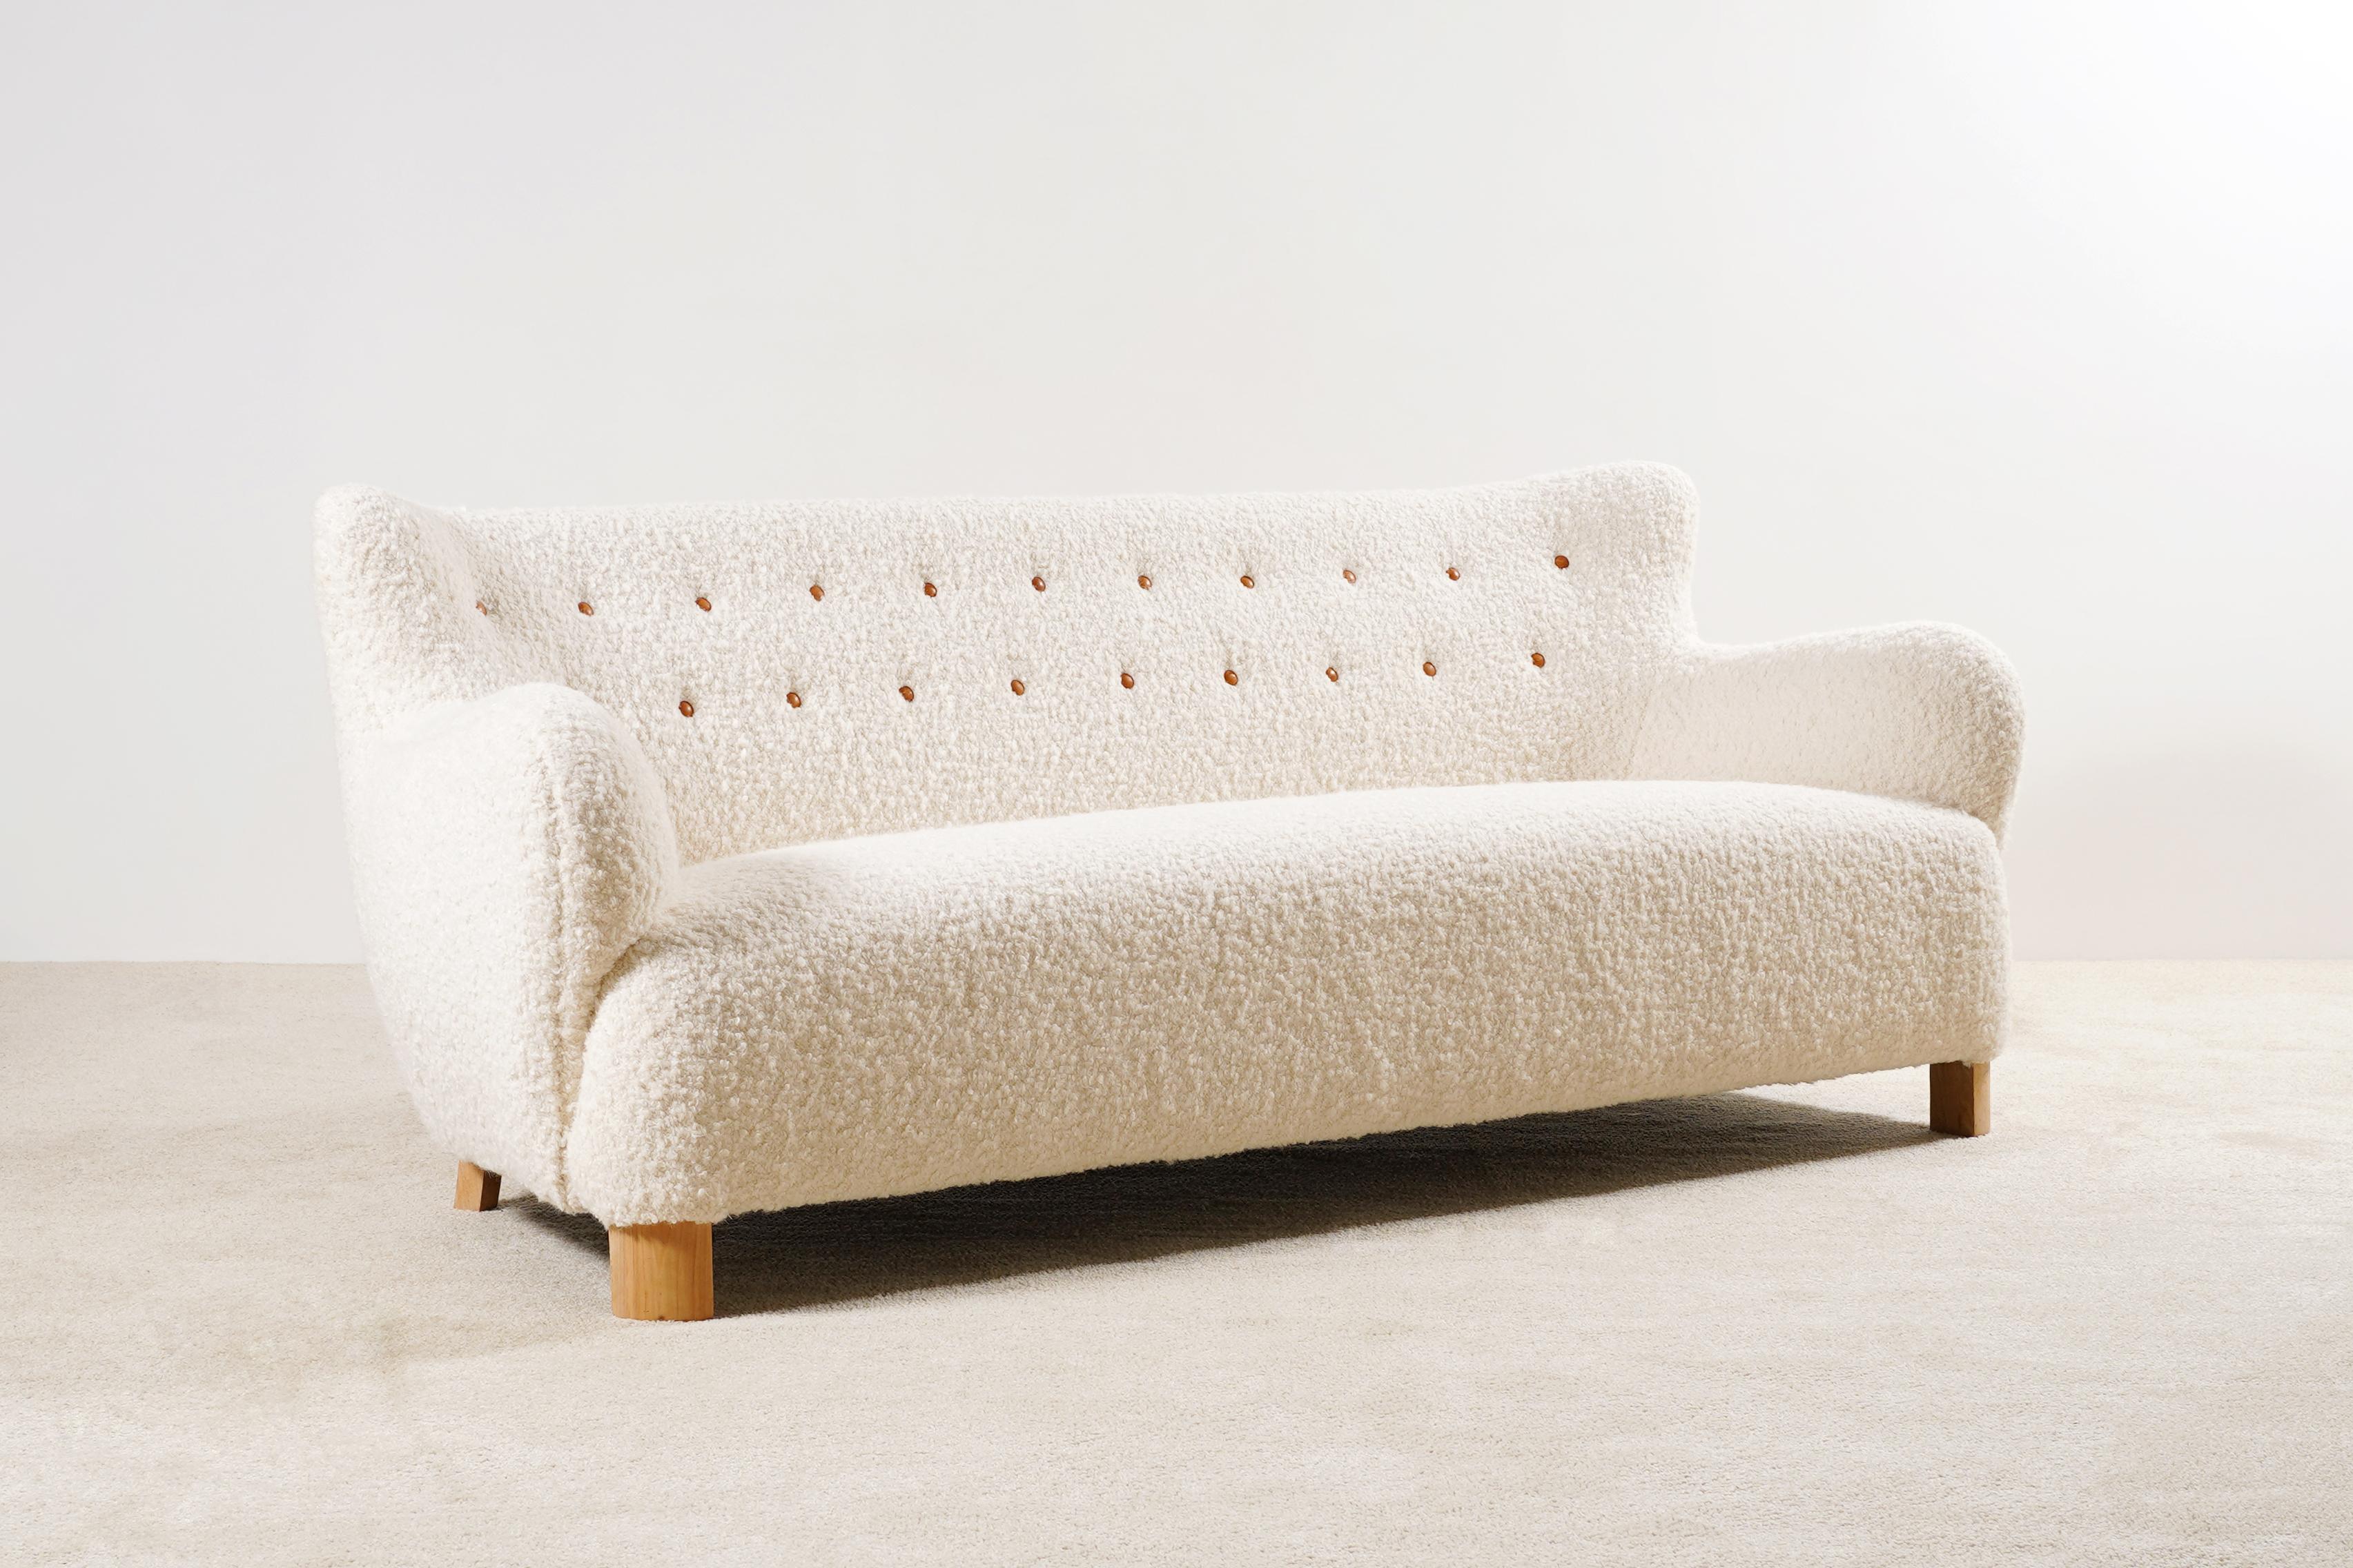 This Three-seat curved sofa is an original piece from the 1940s, manufactured in Denmark.
Unknown designer but the style is similar of Flemming Lassen's sofa designs made by AJ Iversen, and Fritz Hansen productions from The 40's.
Lovely shape and